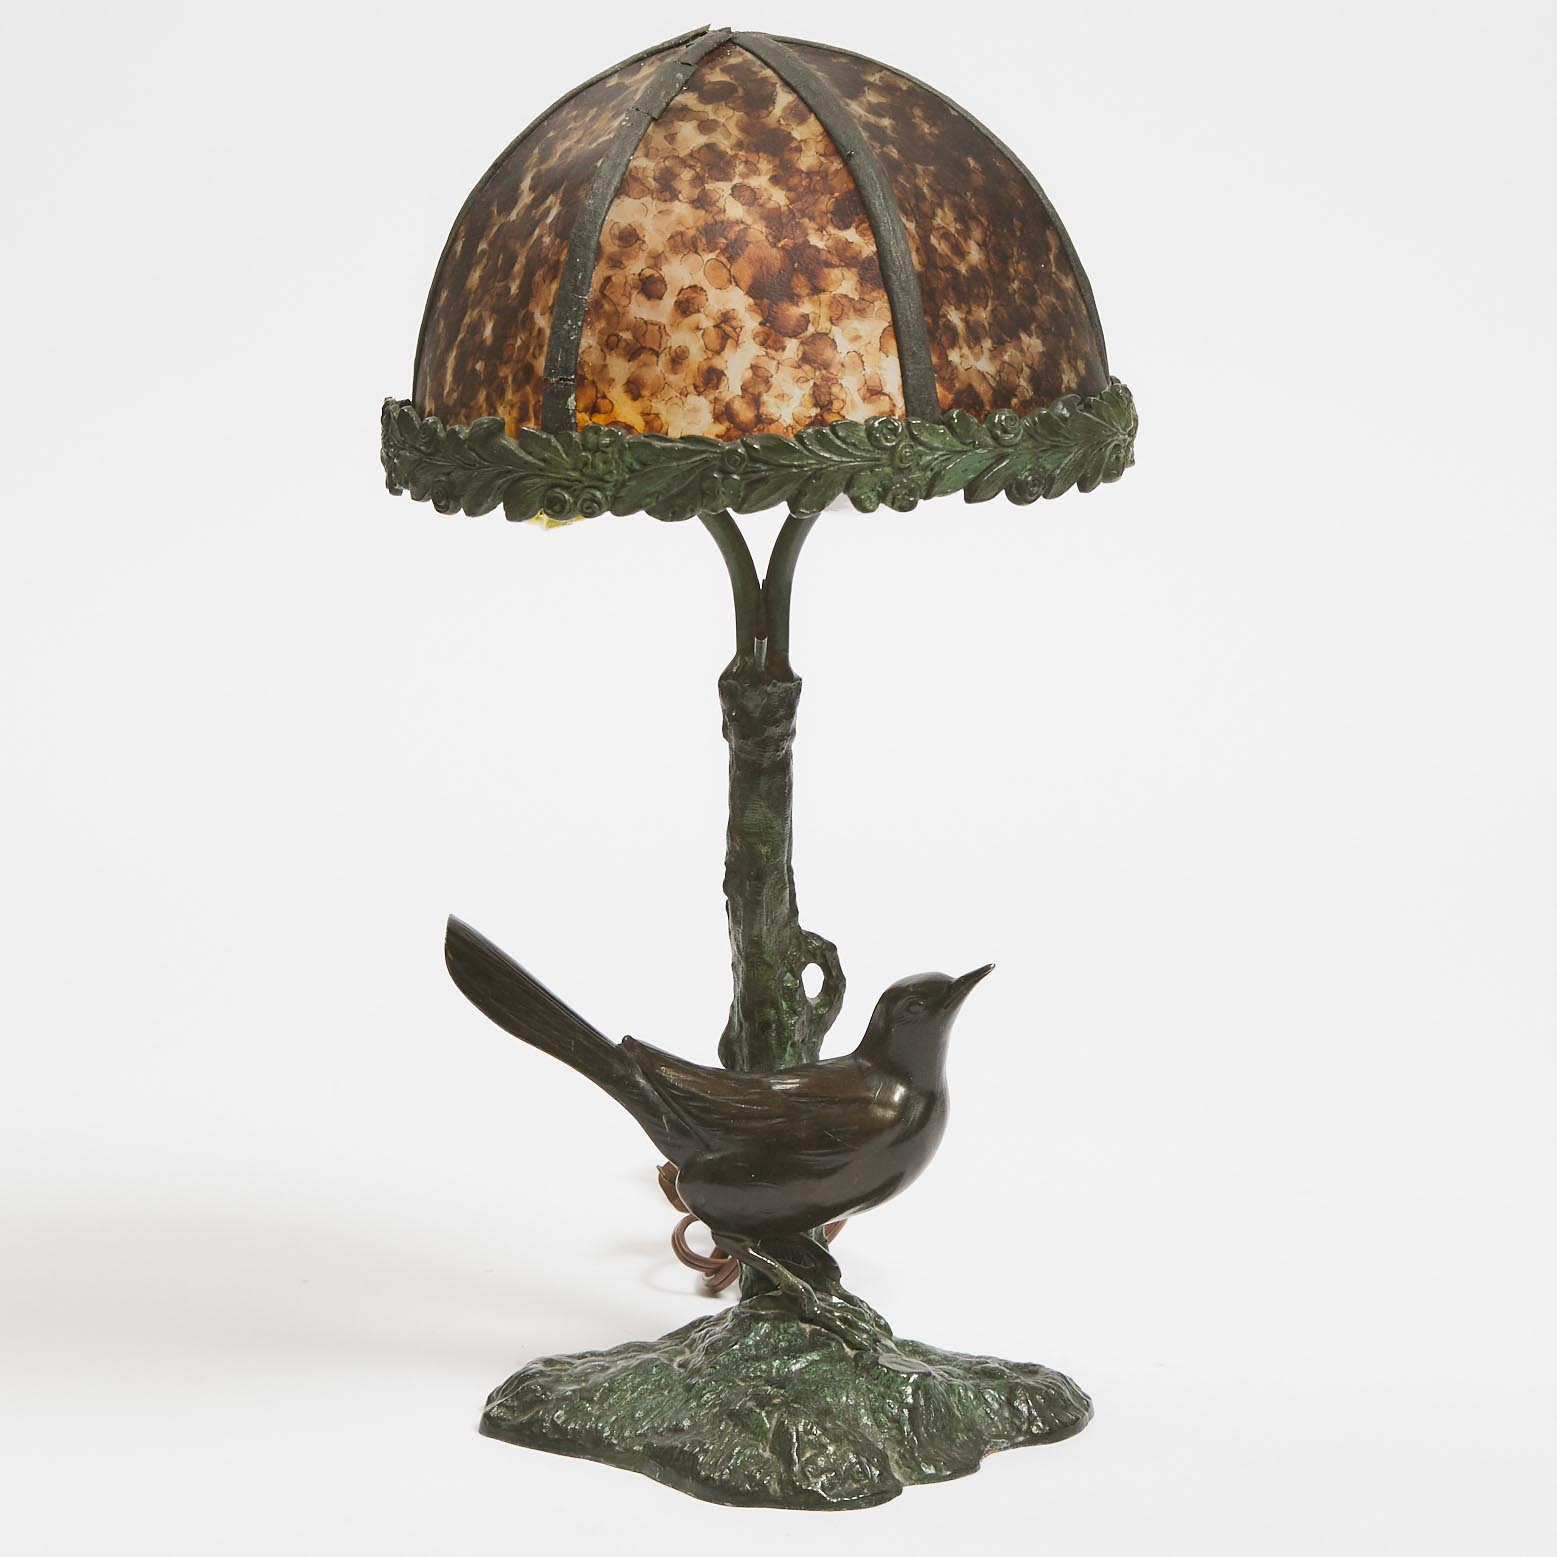 Patinated White Metal Avian Lamp, early-mid 20th century